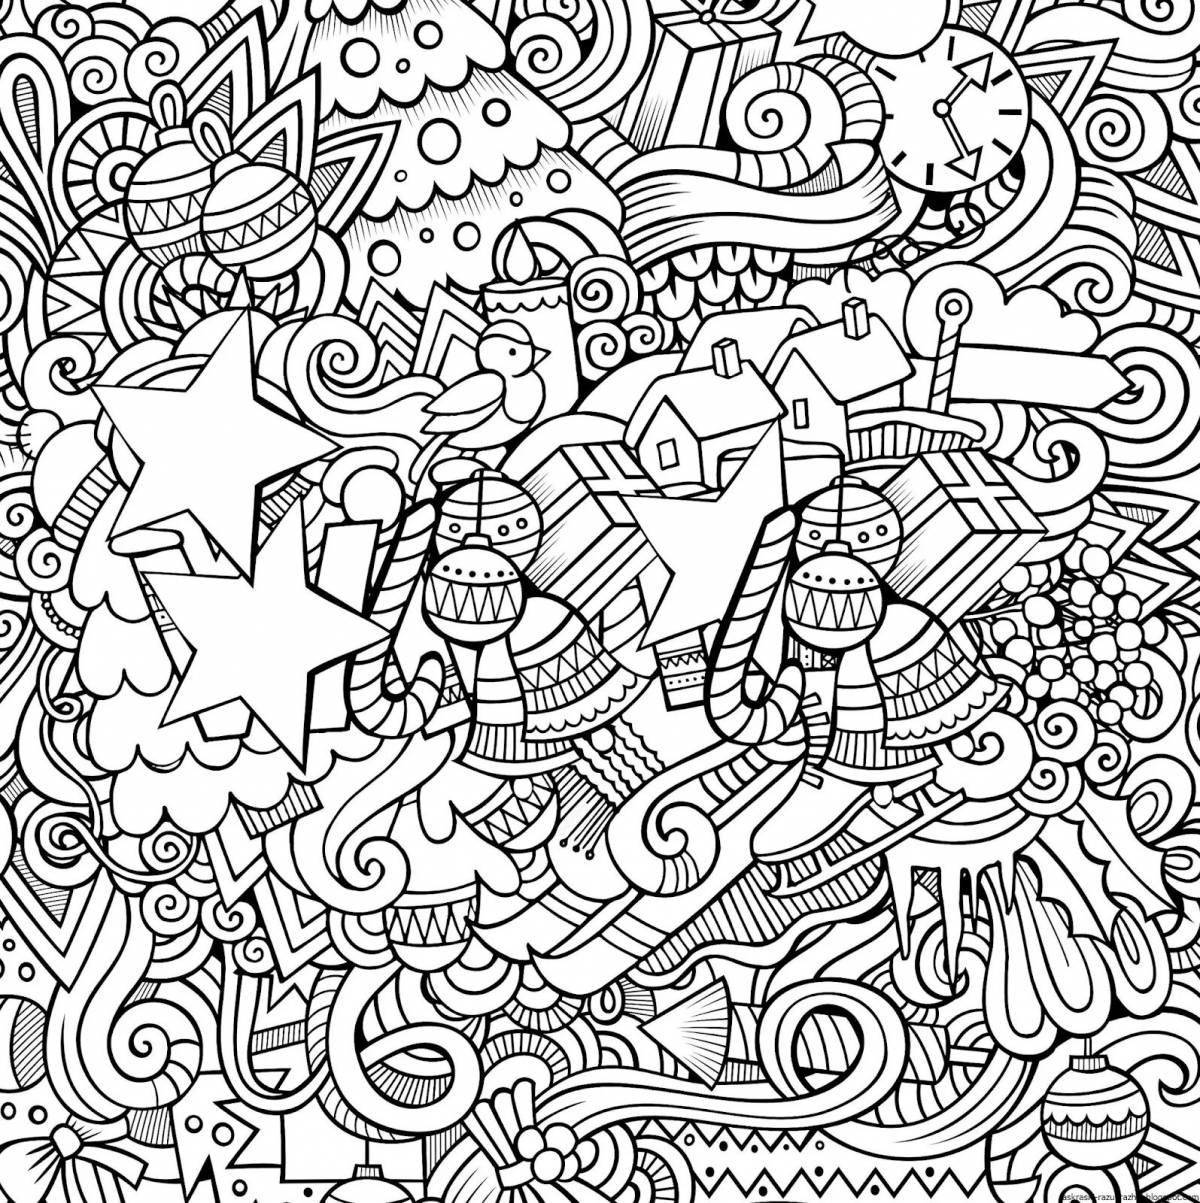 Relaxing anti-stress coloring book for teenagers